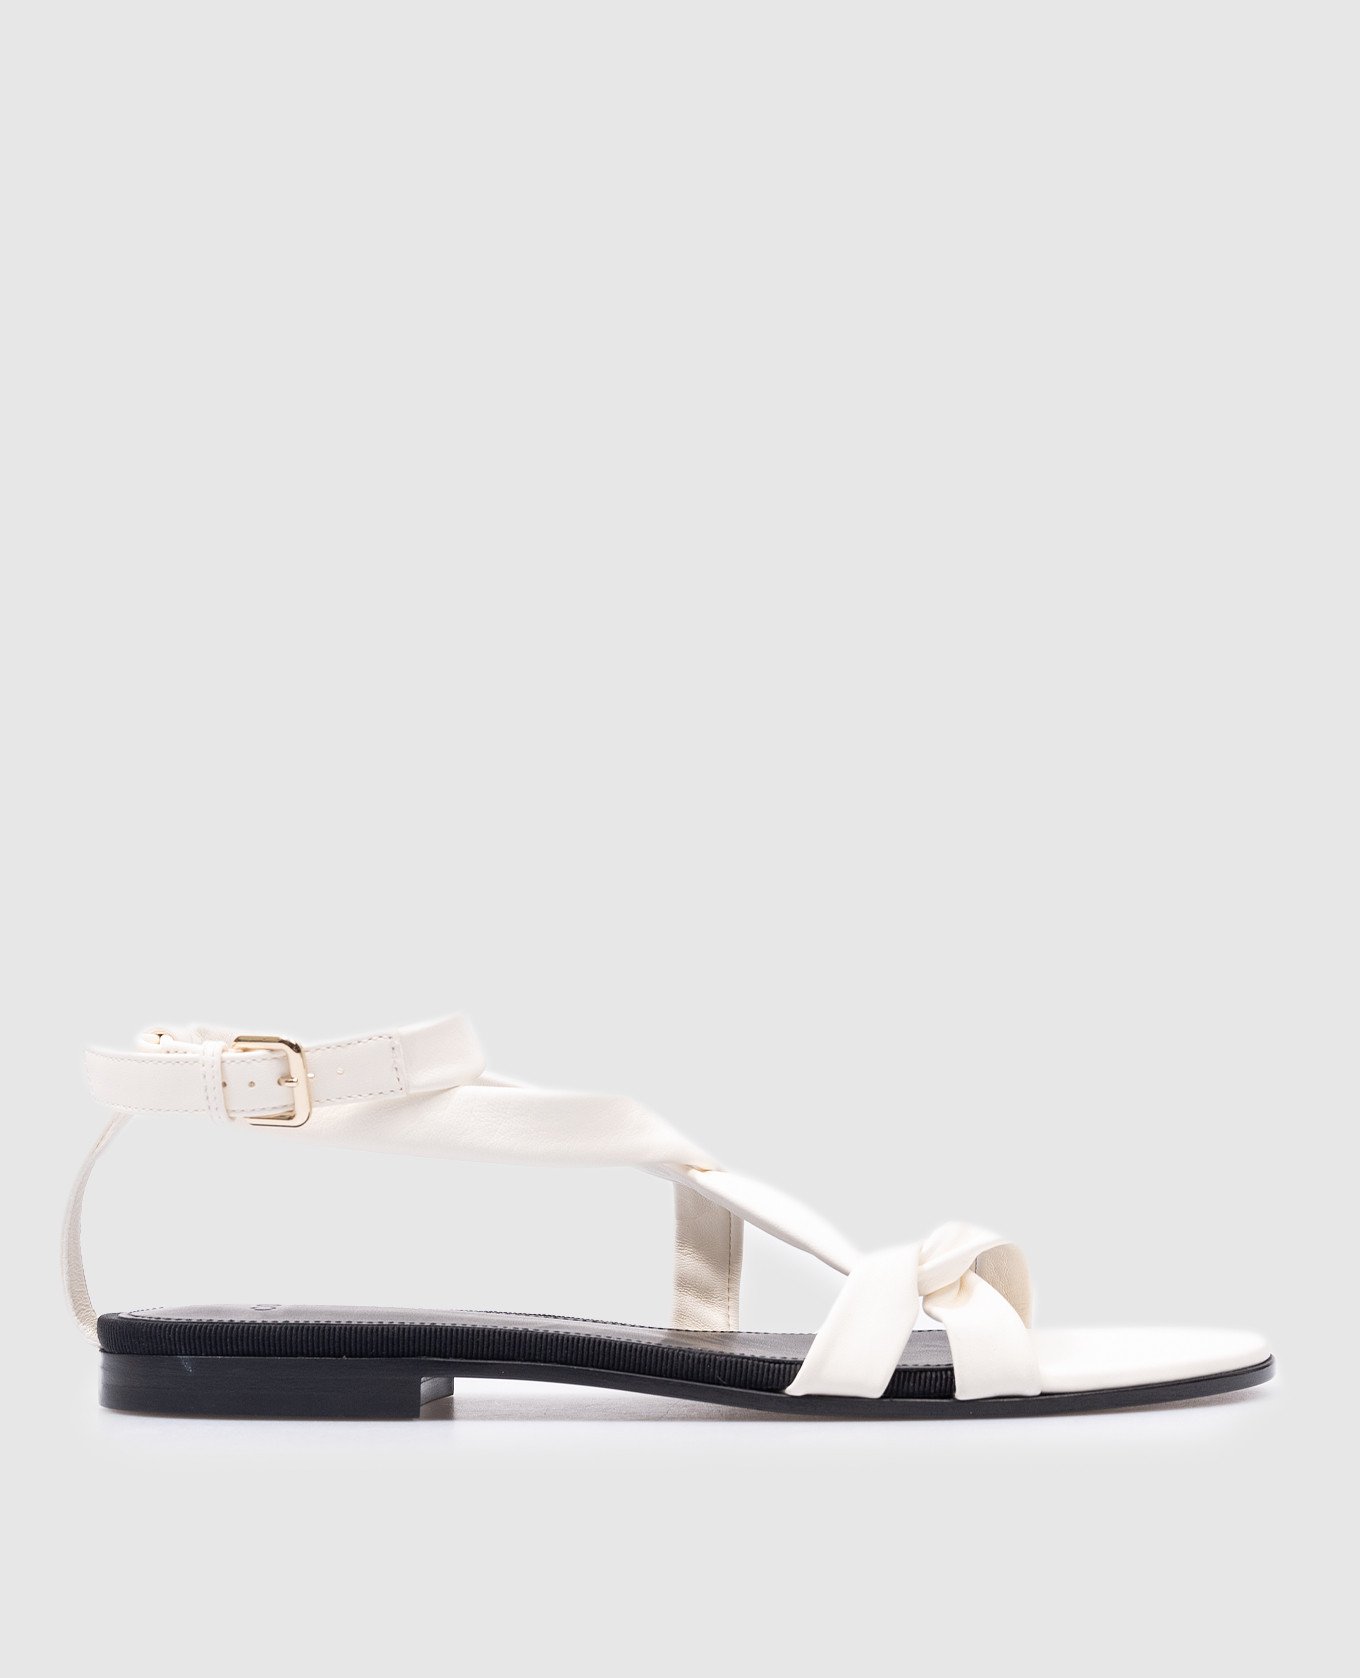 White leather sandals